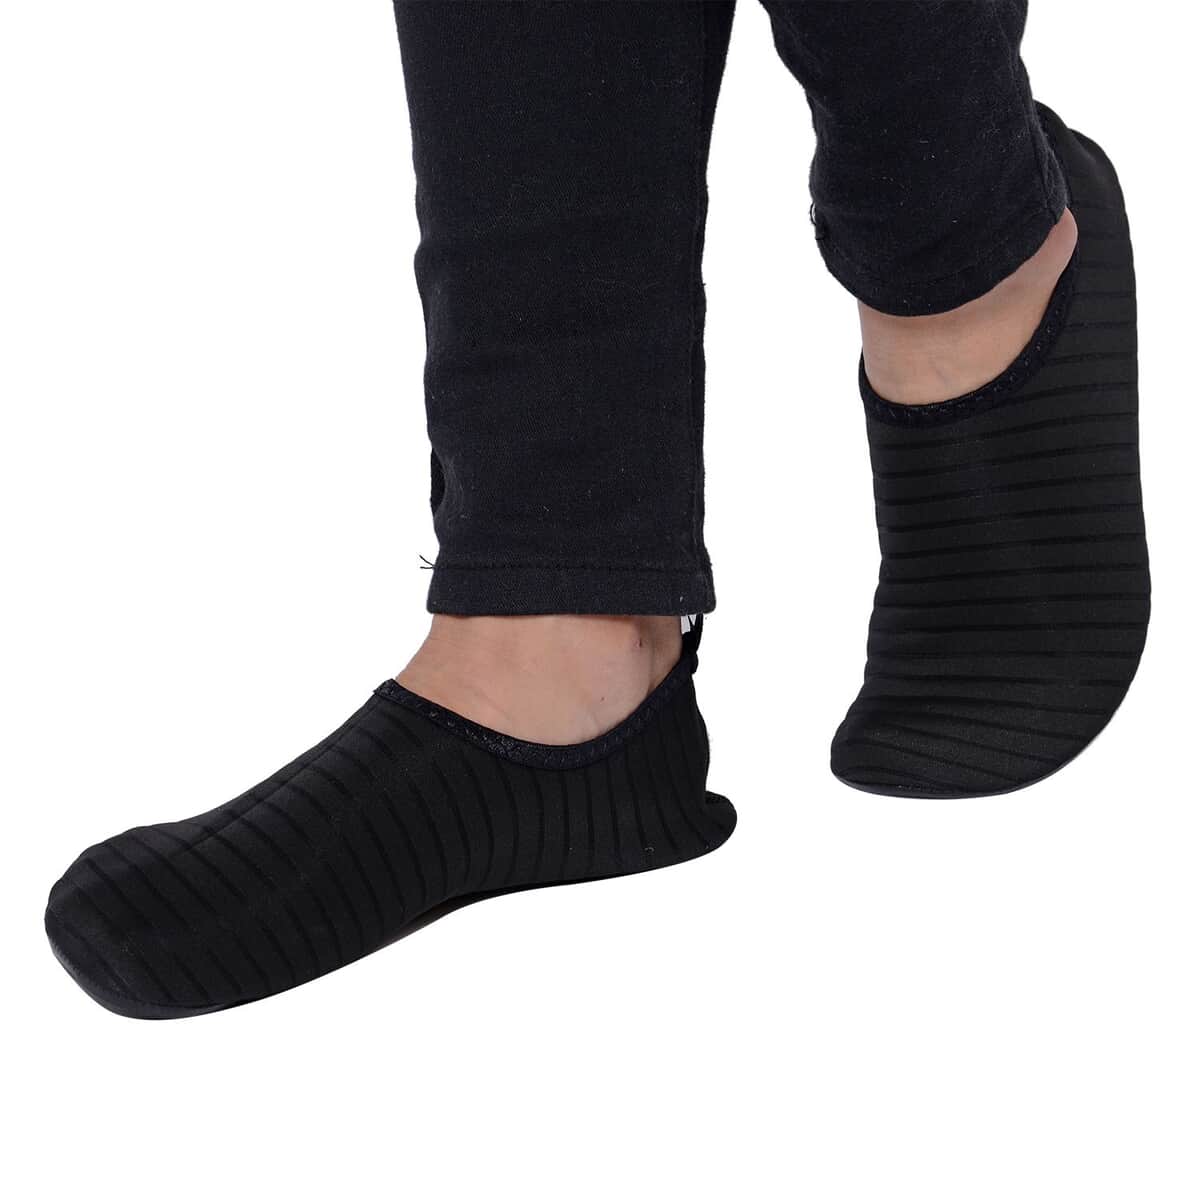 Black Women's and Men's Water Shoes Barefoot Quick-Dry Aqua Socks image number 2